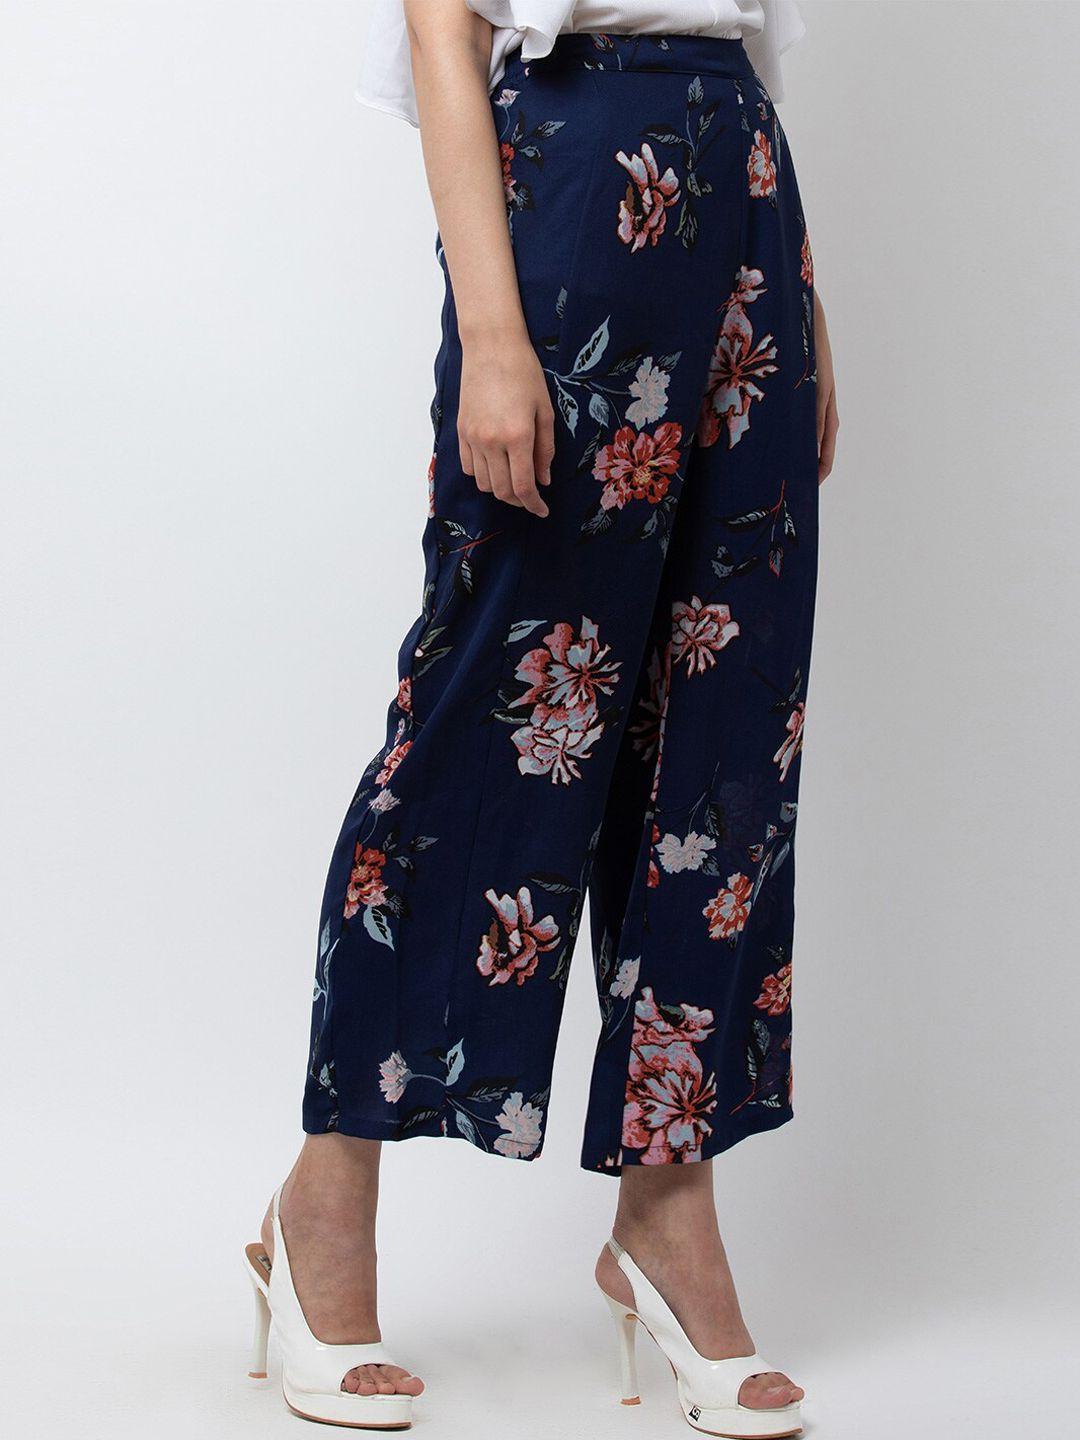 dodo & moa women navy blue floral printed regular trousers